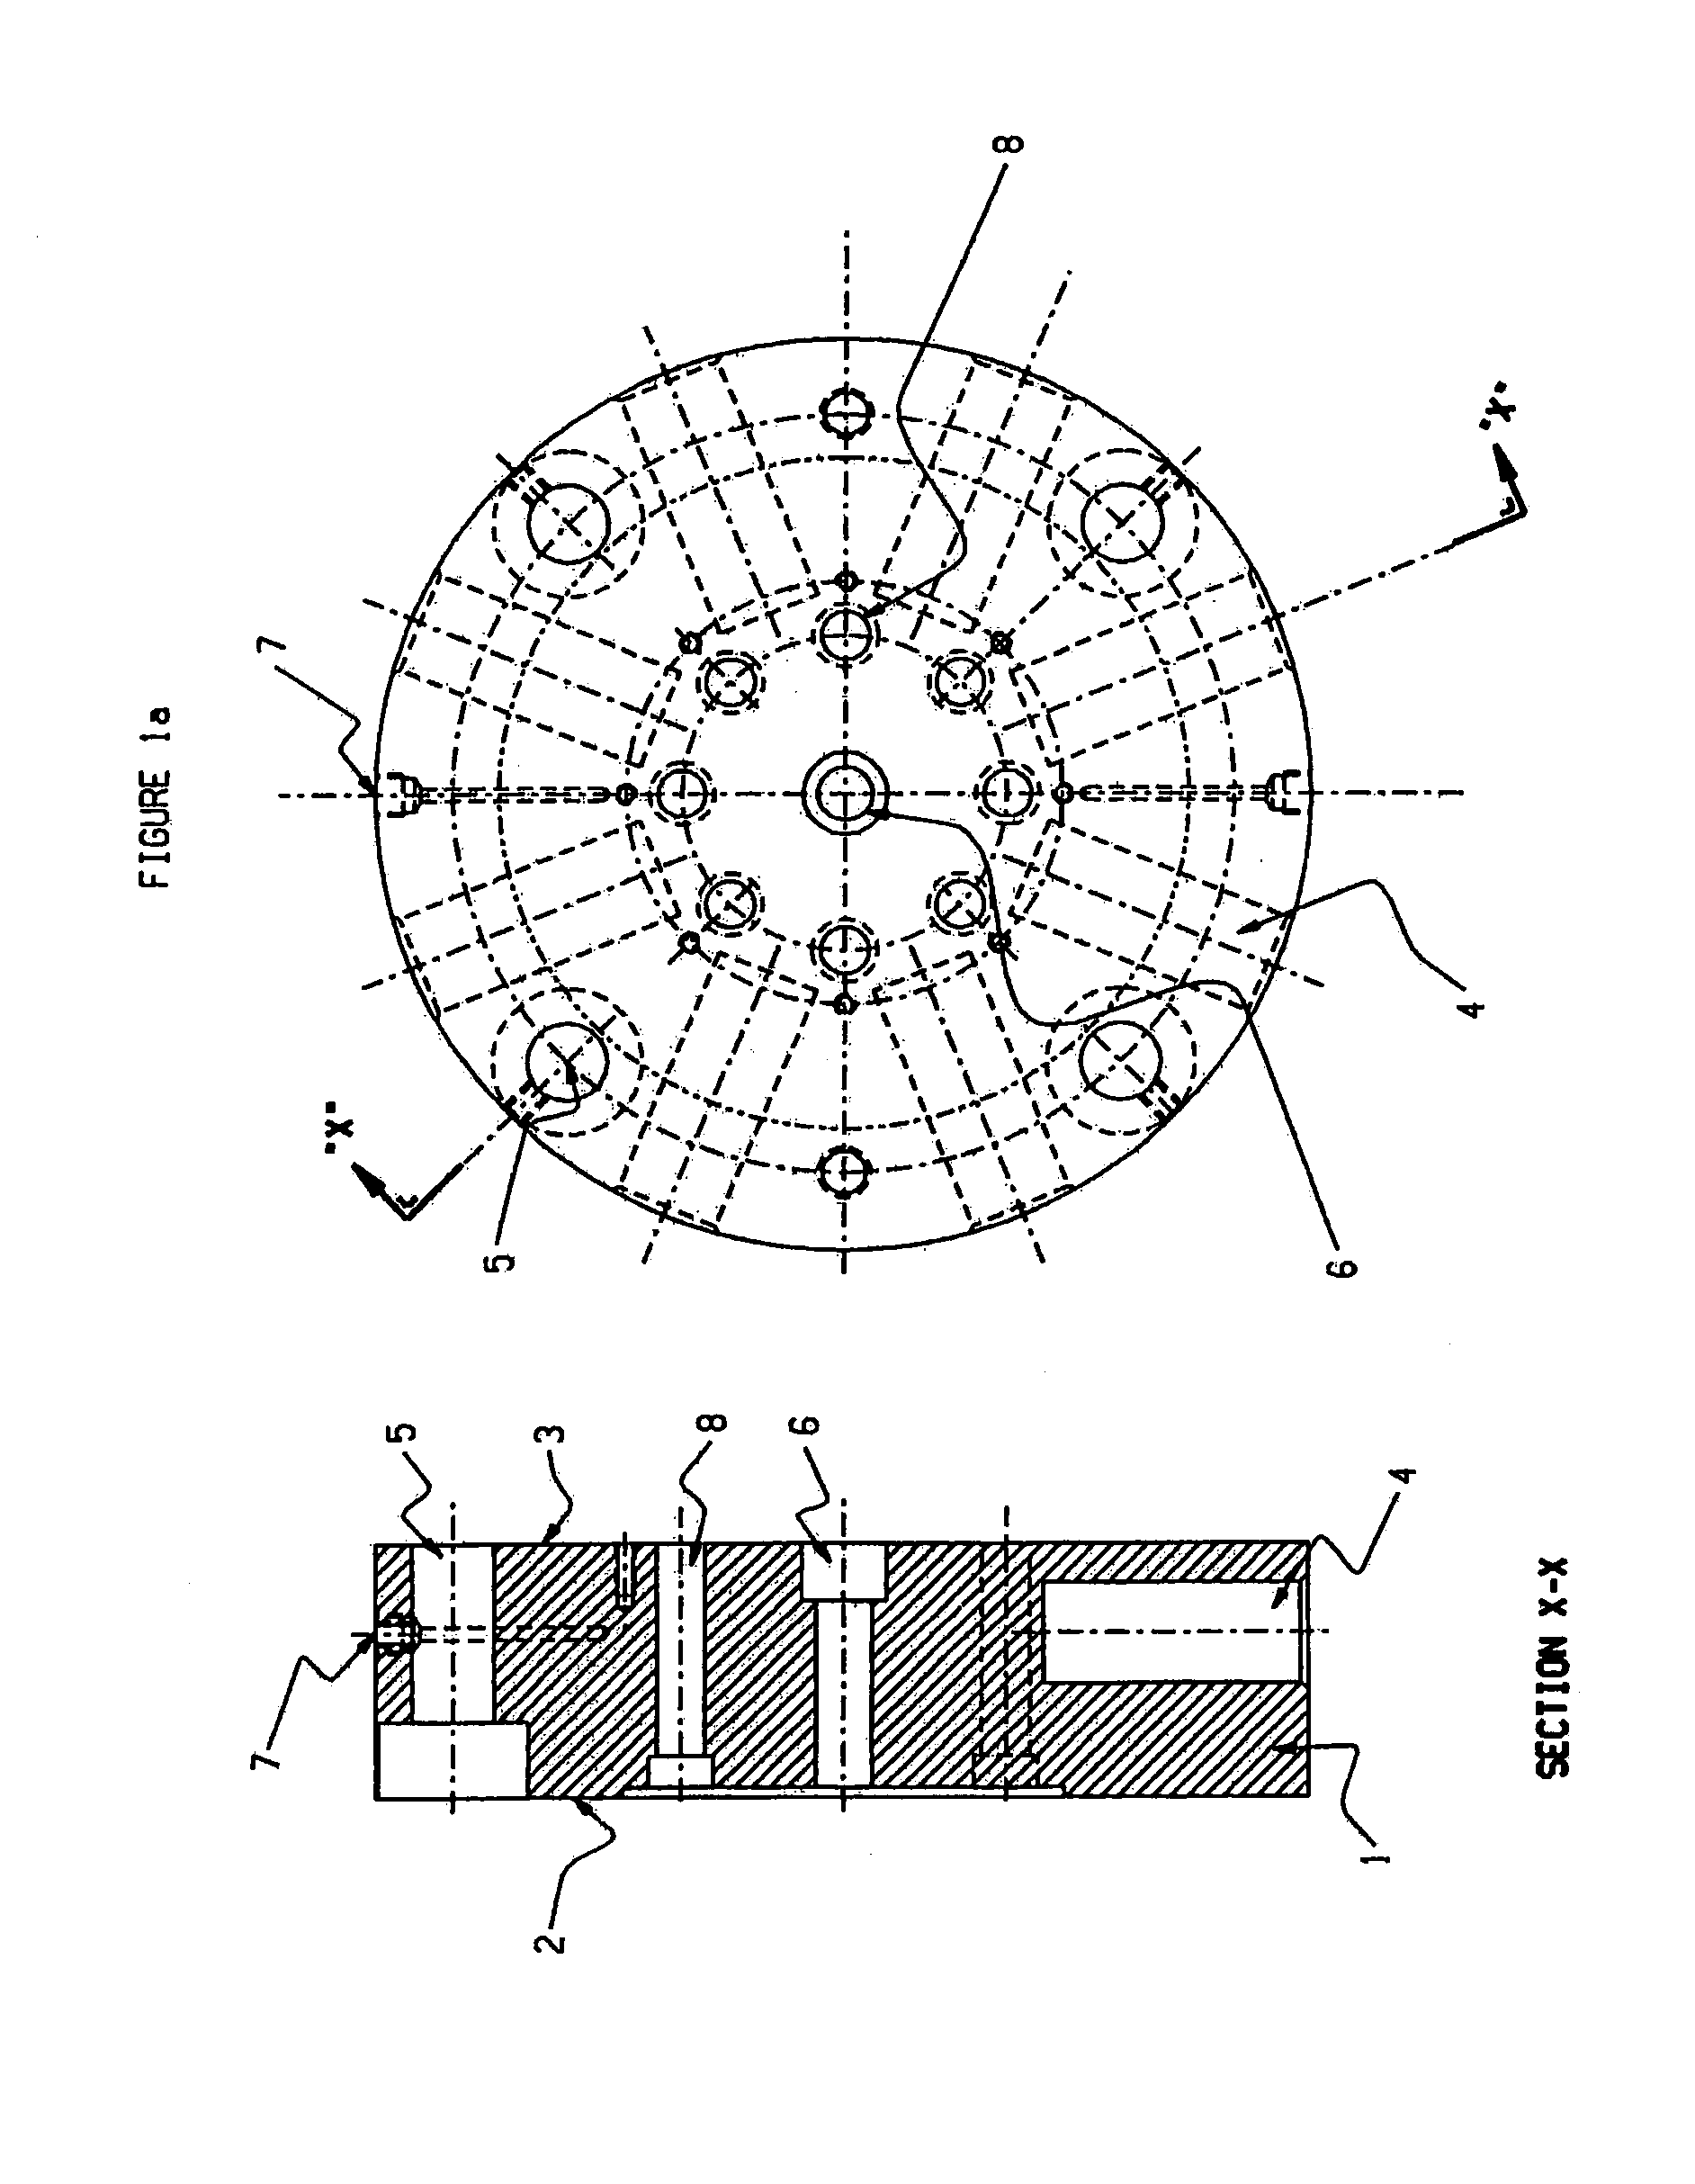 Polymer underwater pelletizer apparatus and process incorporating same